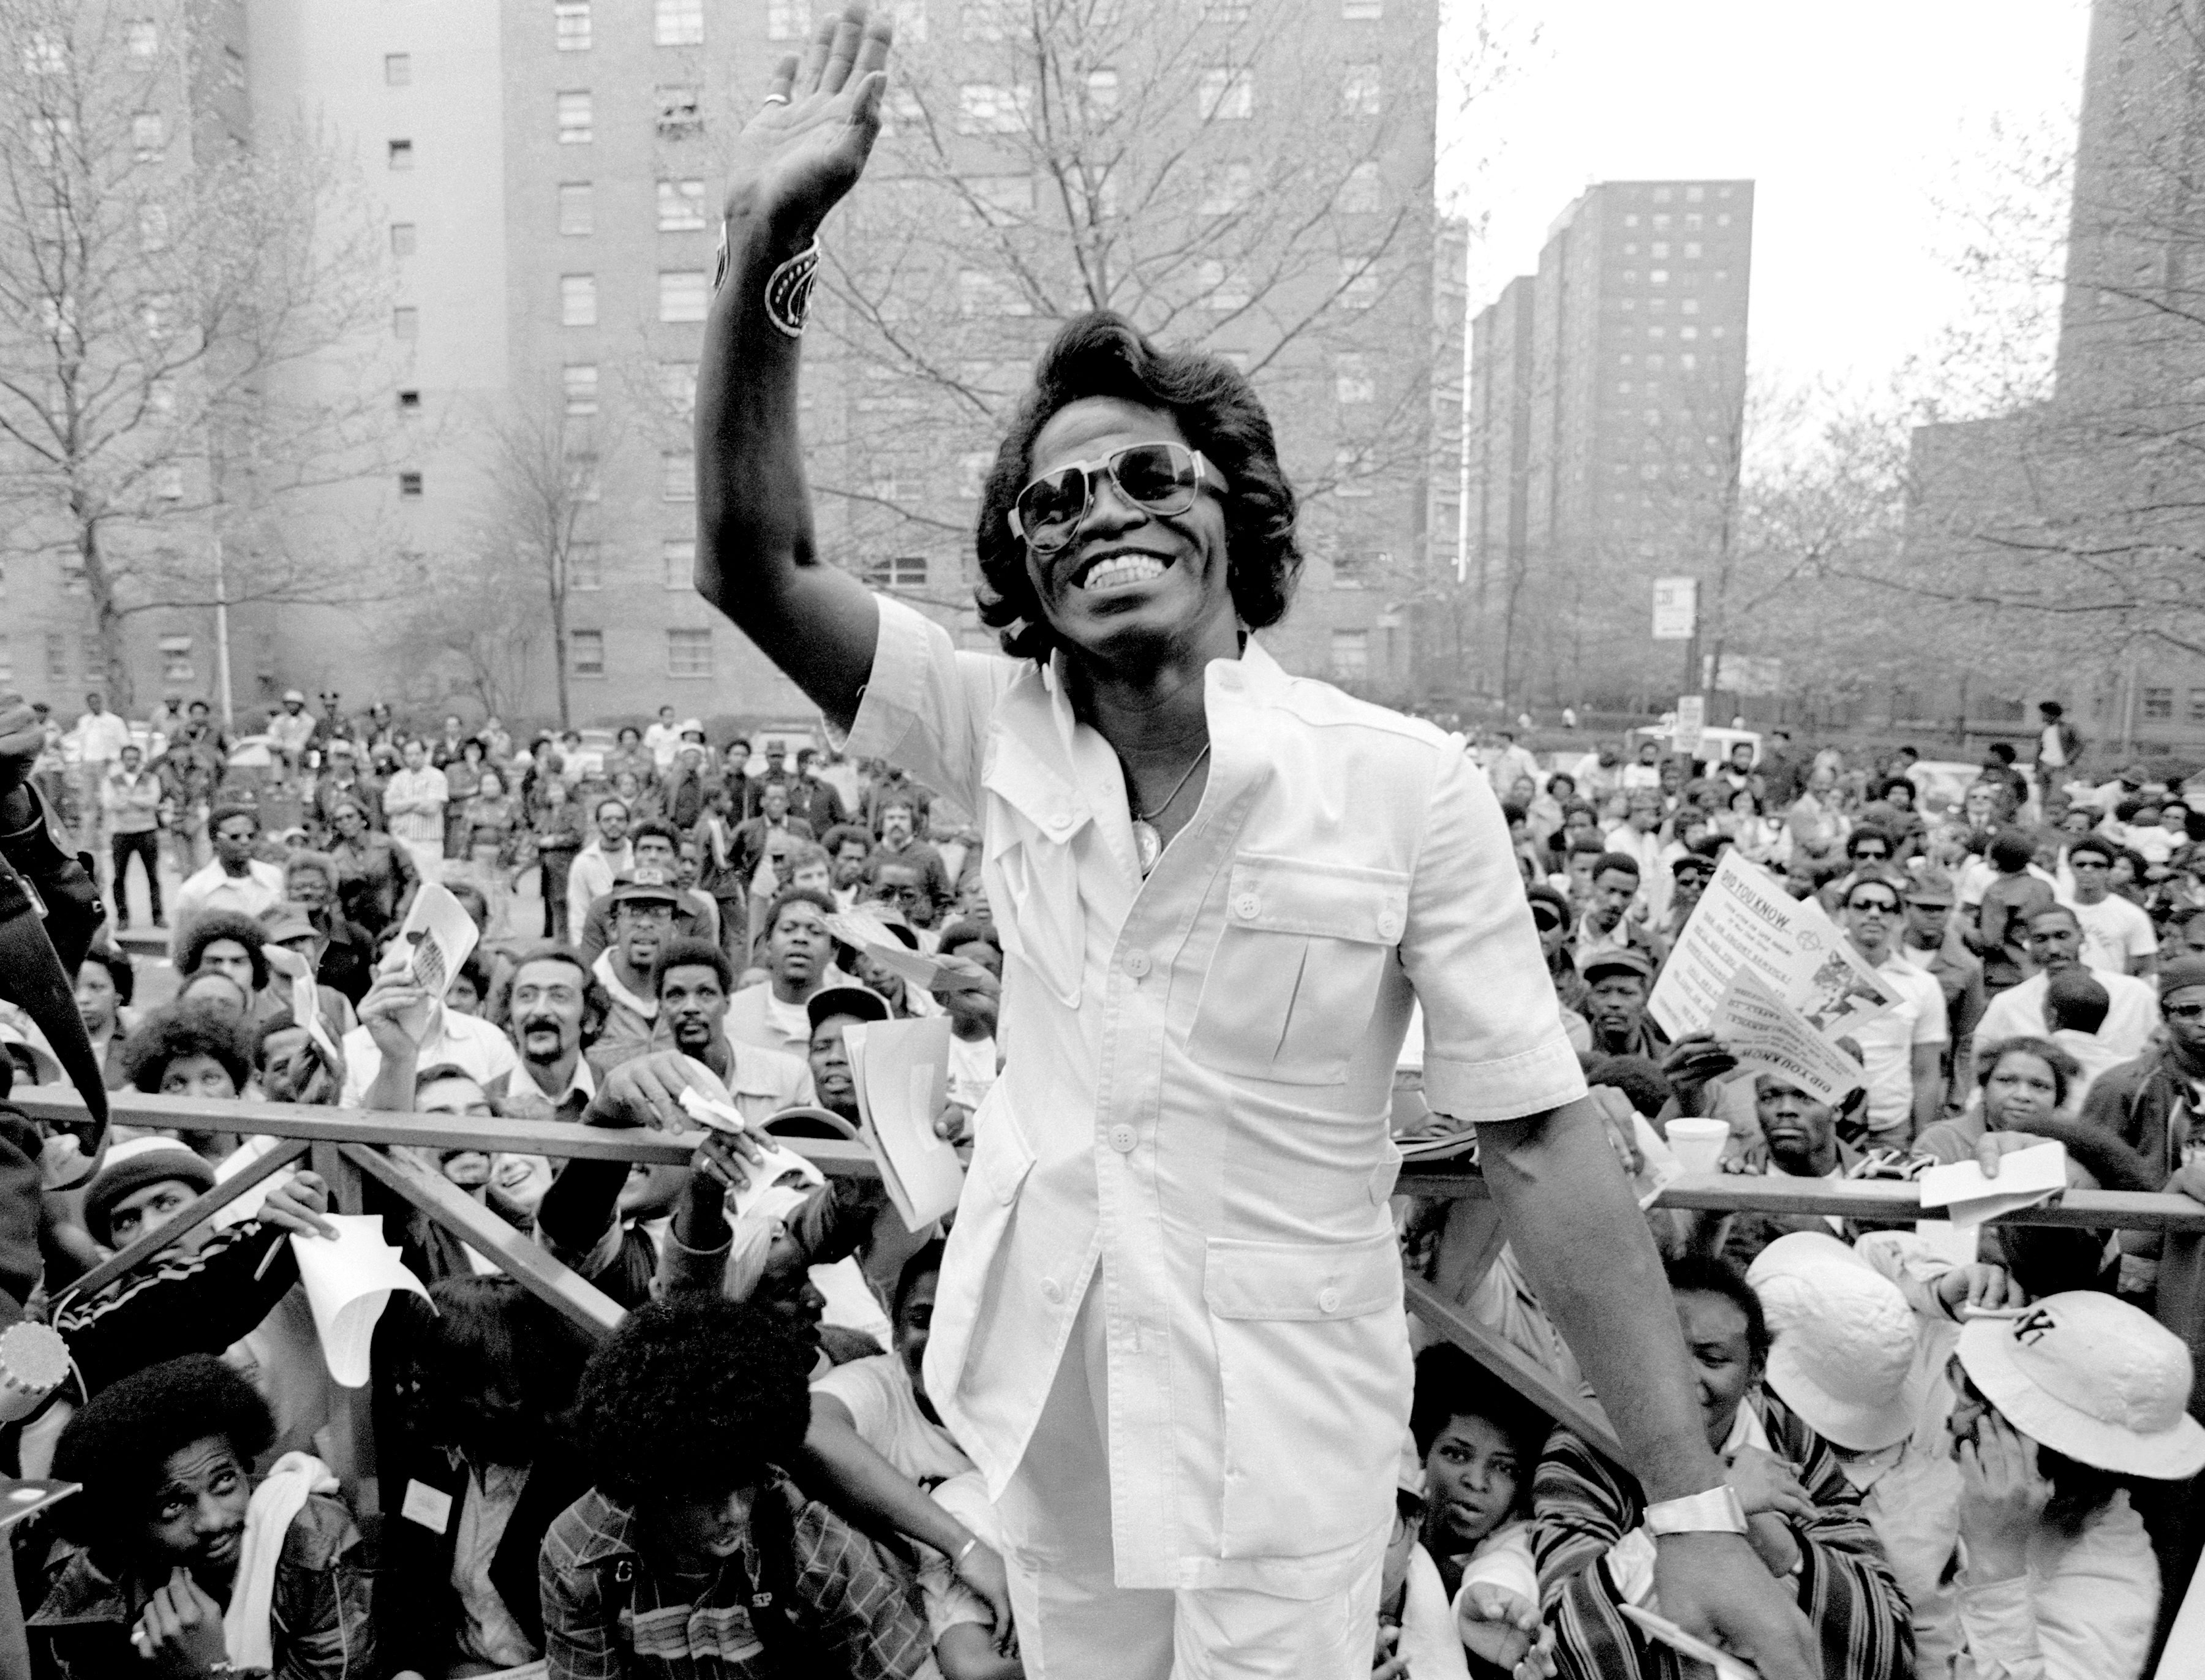 James Brown visits Harlem in New York to meet fans on May 03 1979 | Source: Getty Images